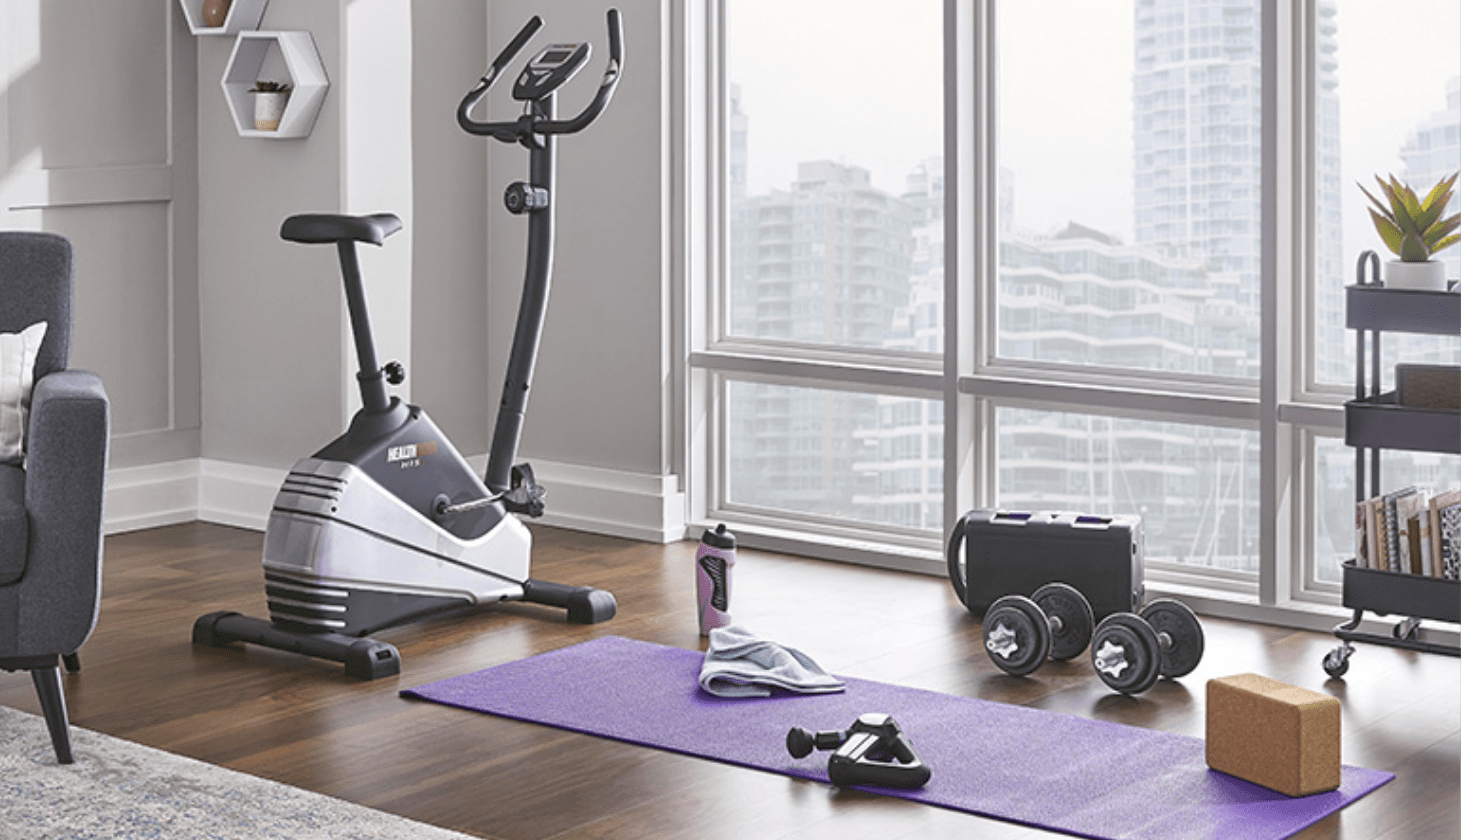 Weights, water bottle, towel on a yoga mat and an exercise bike near a large window. 